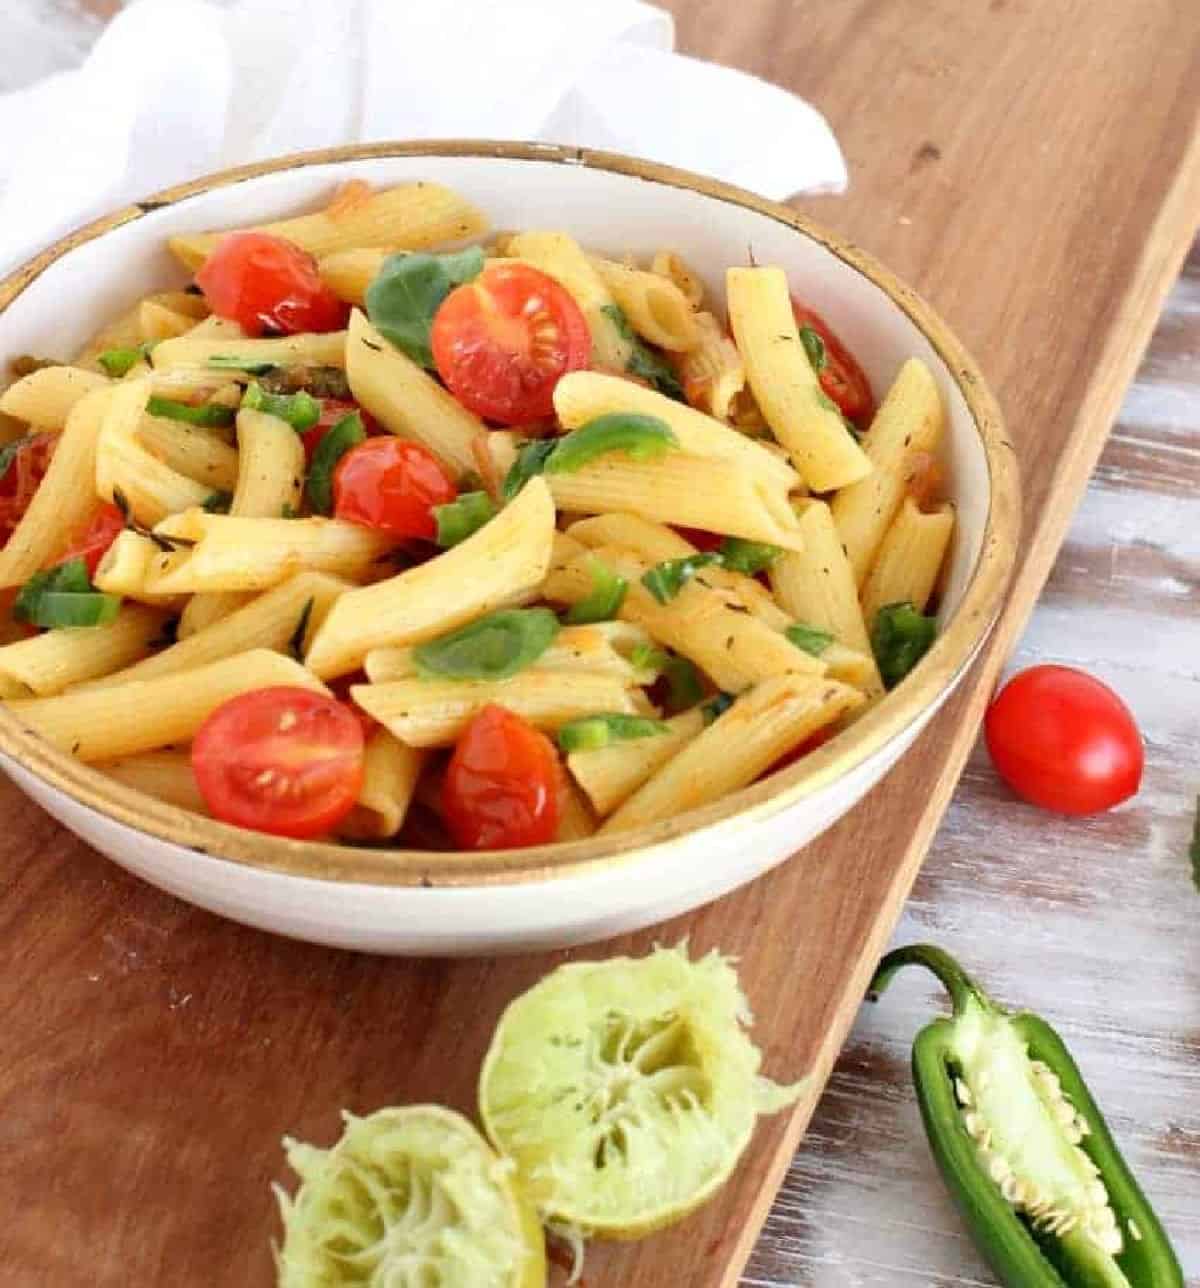 Bowl with short pasta and tomatoes on wooden board, limes and jalapeño around.